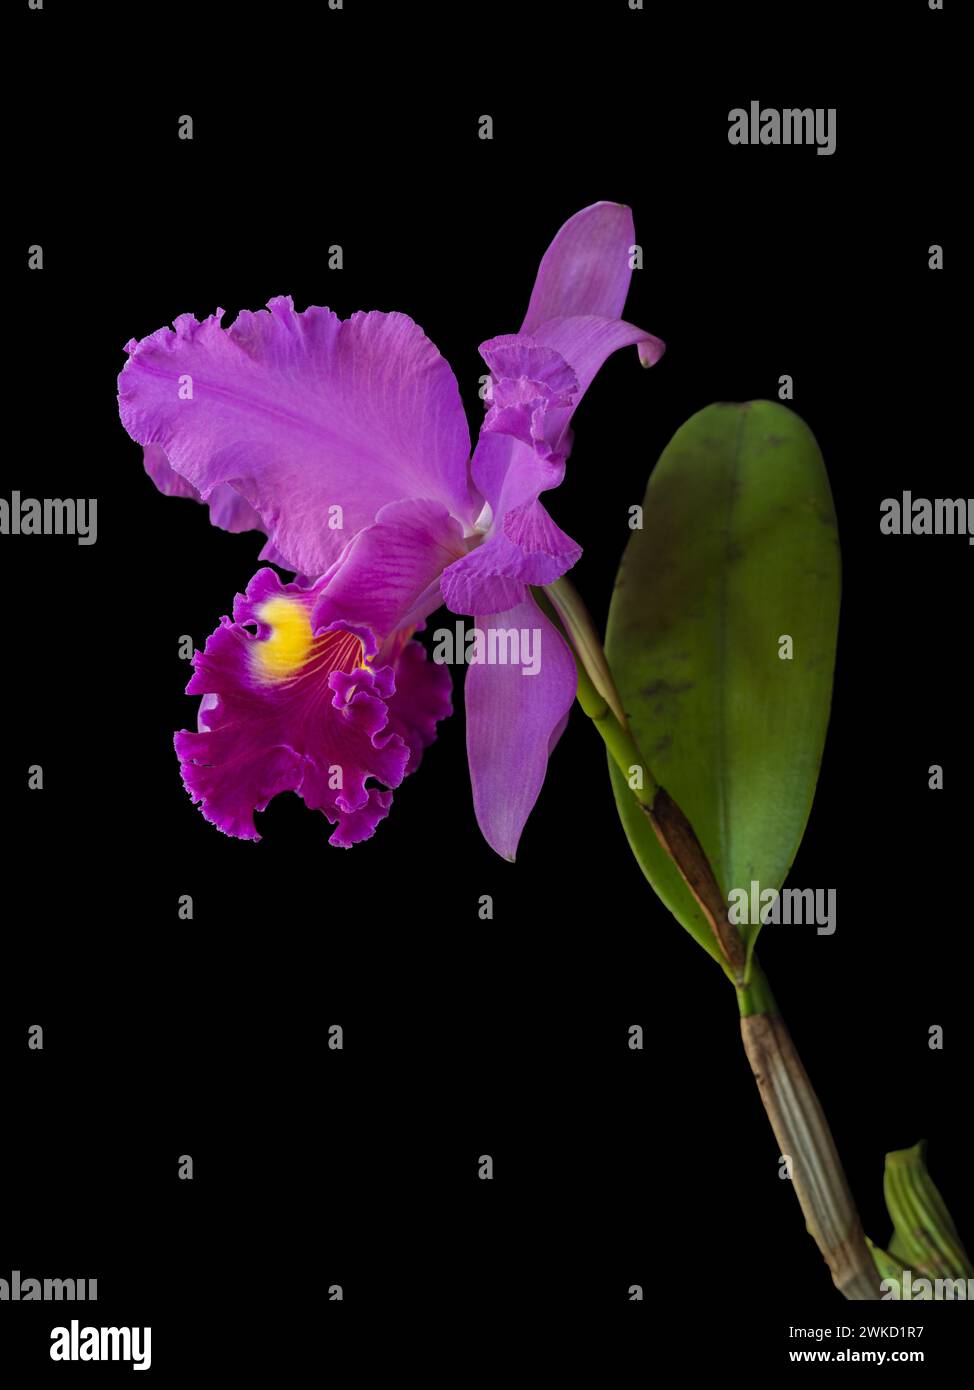 Closeup vertical view of spectacular bright purple pink and golden yellow cattleya hybrid orchid flower isolated on black background Stock Photo